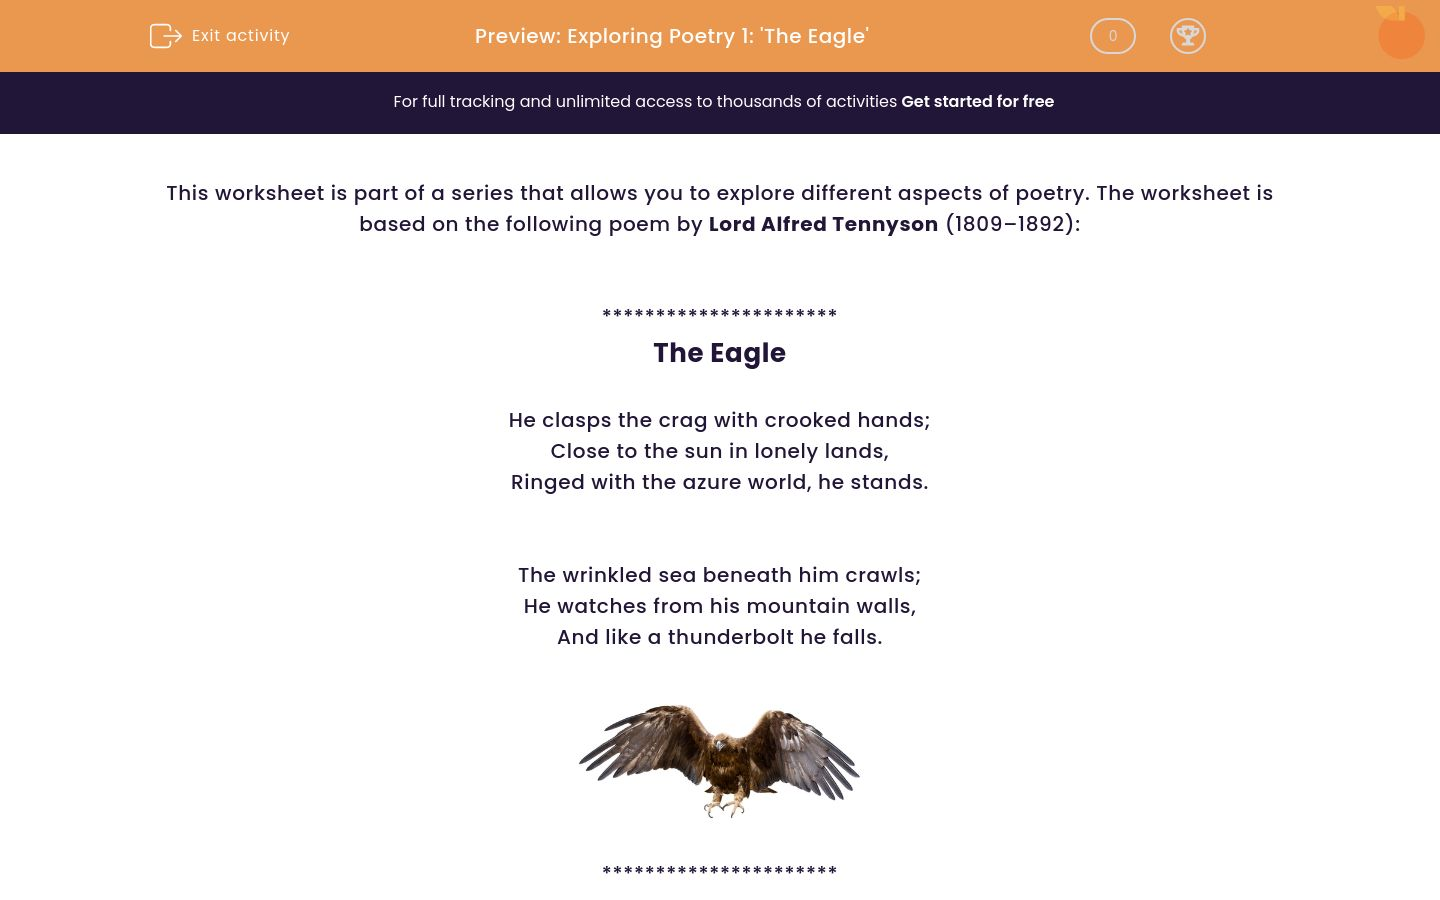 the eagle poem essay questions and answers